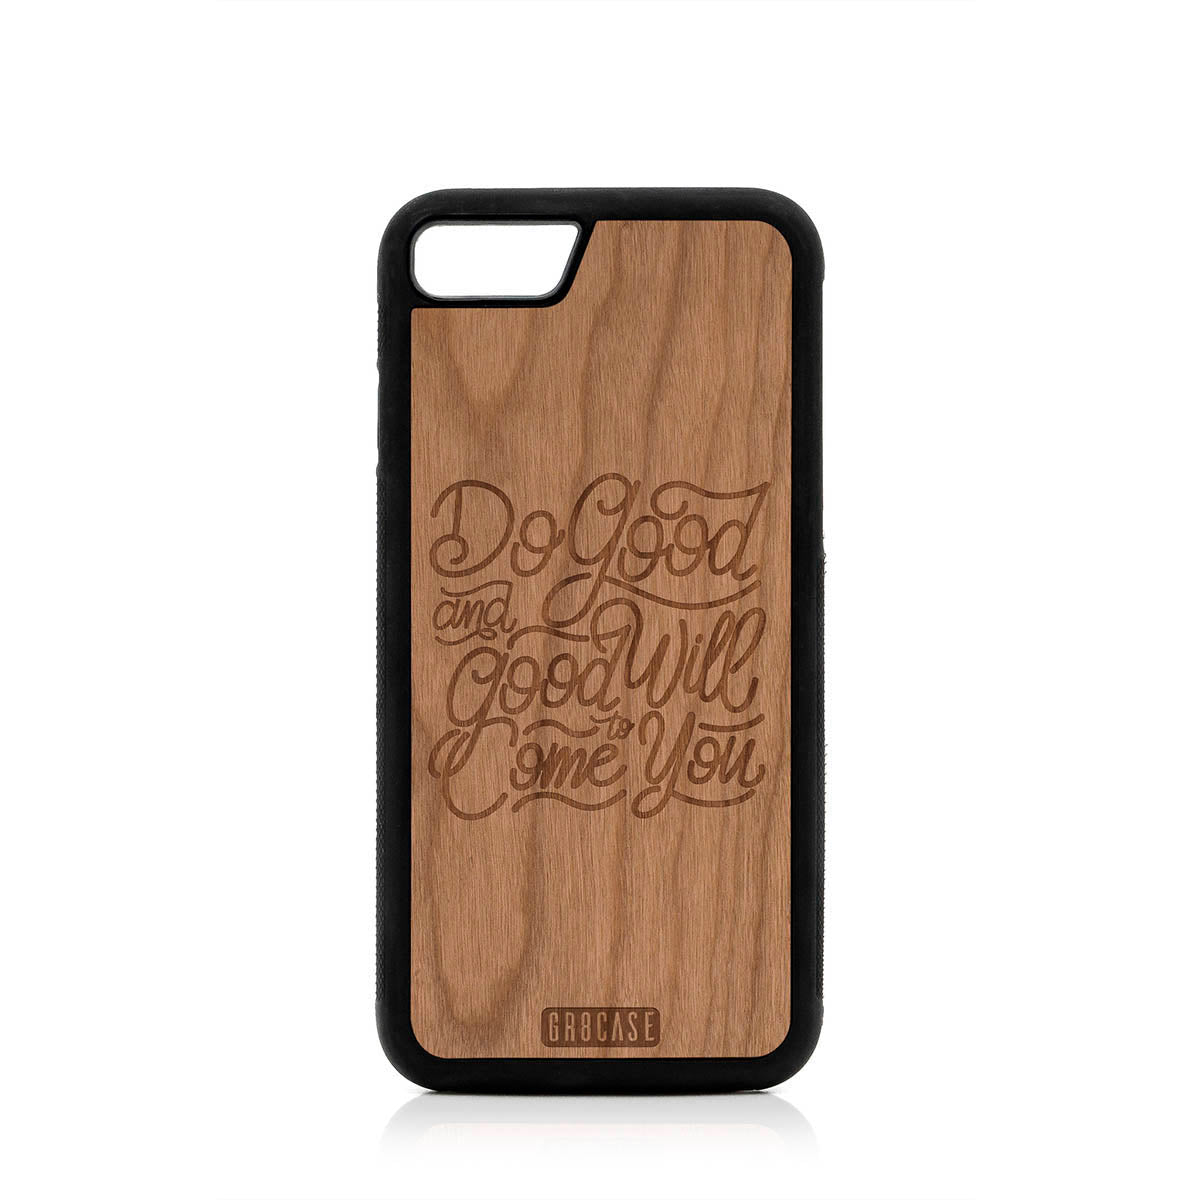 Do Good And Good Will Come To You Design Wood Case For iPhone SE 2020 by GR8CASE